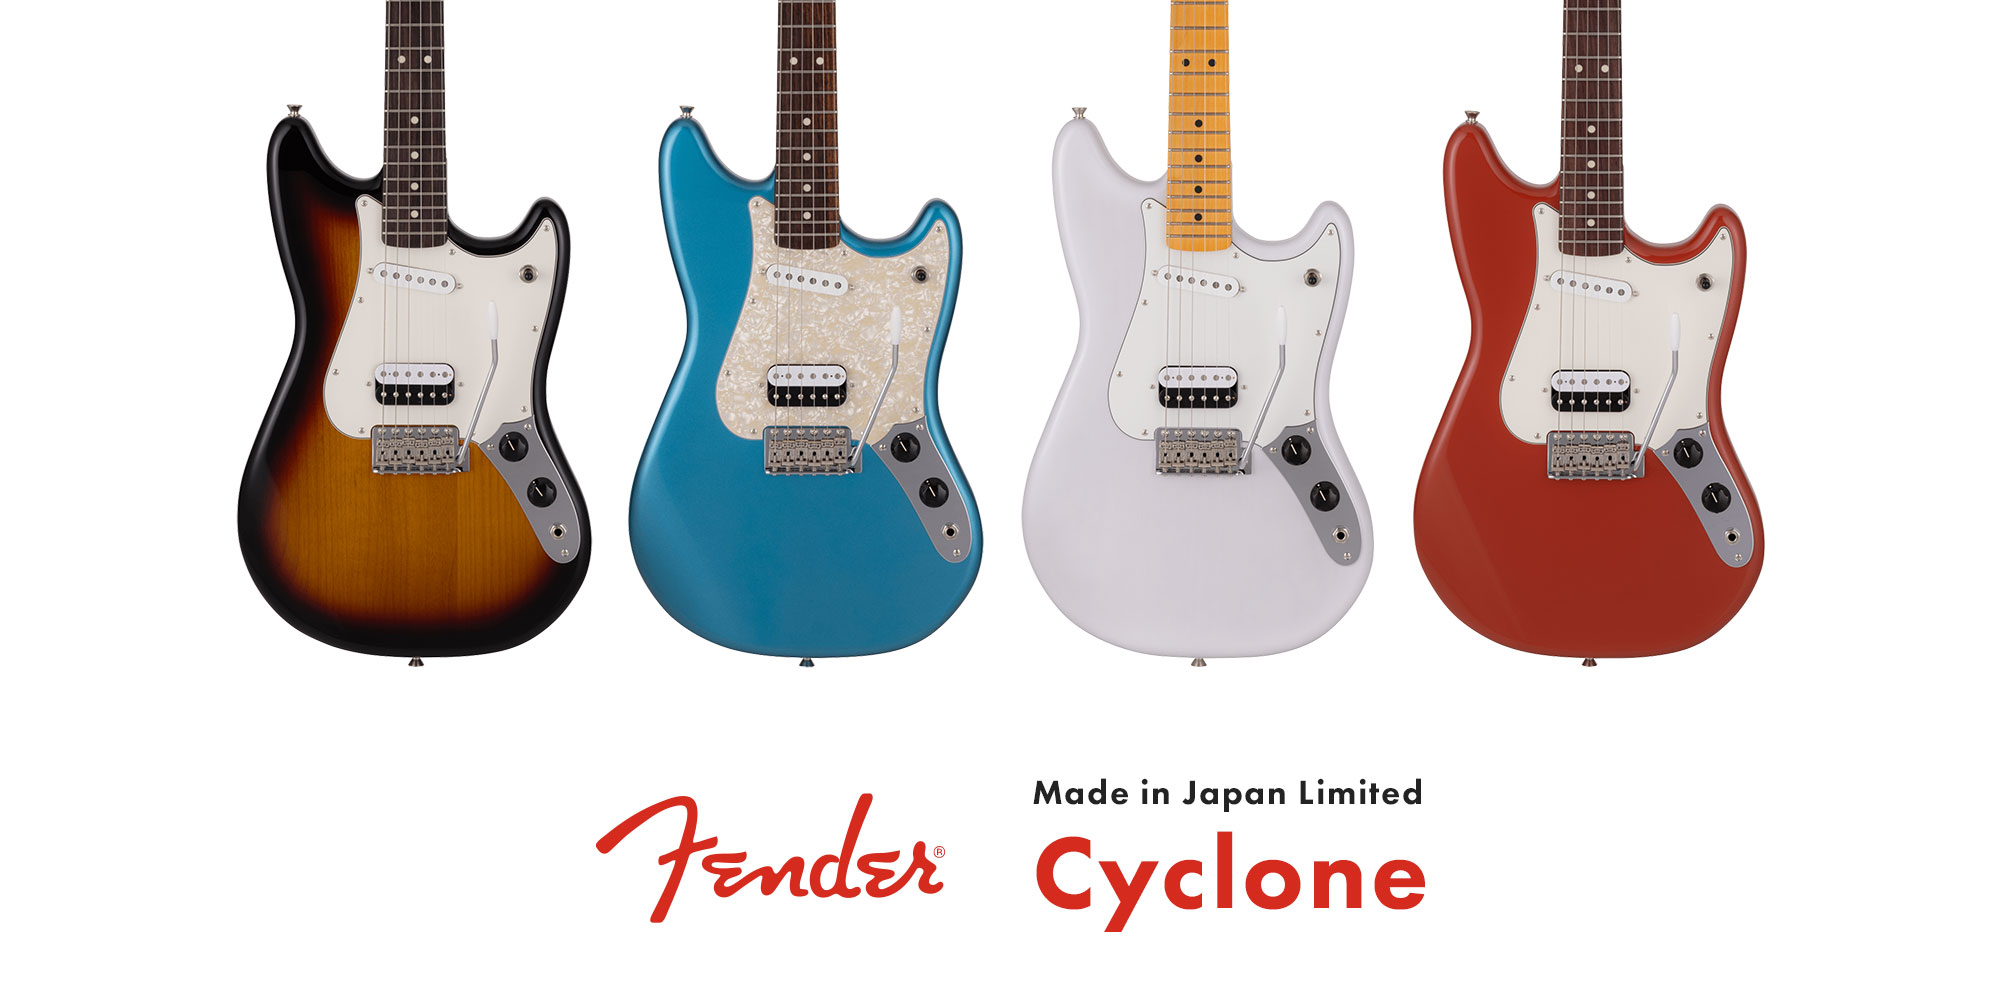 Made in Japan Limited Cyclone